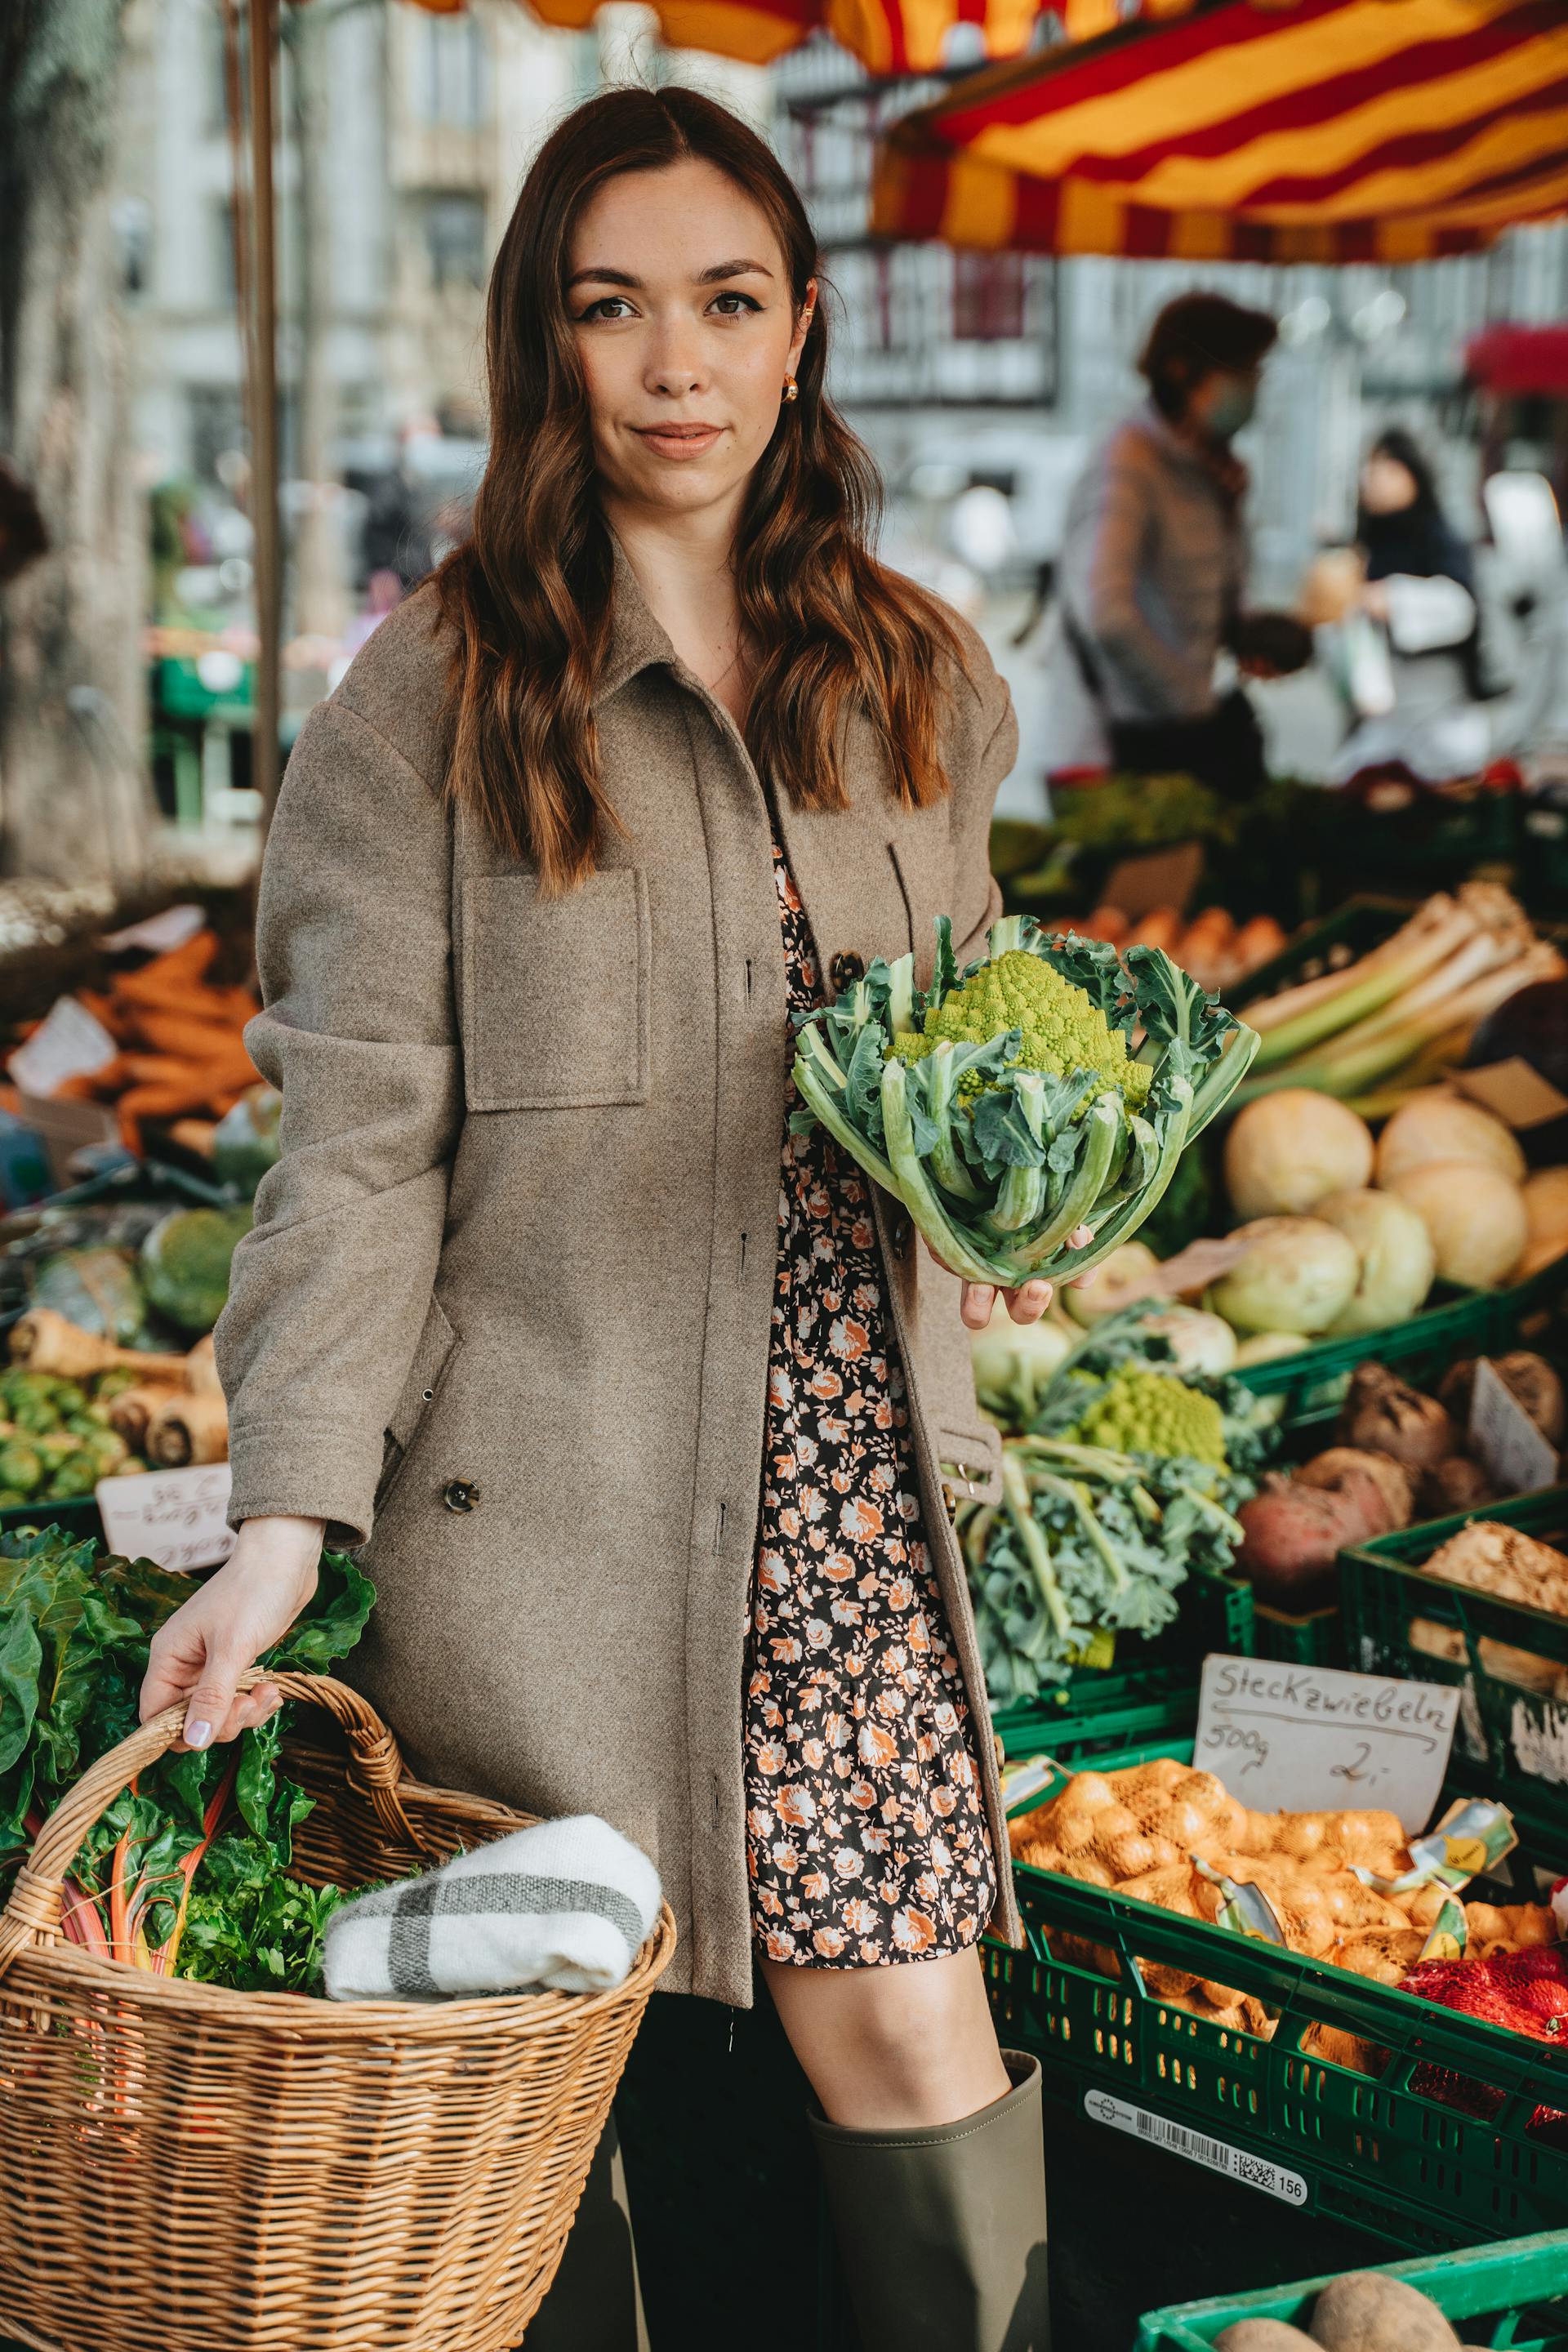 A woman at a grocery store | Source: Pexels